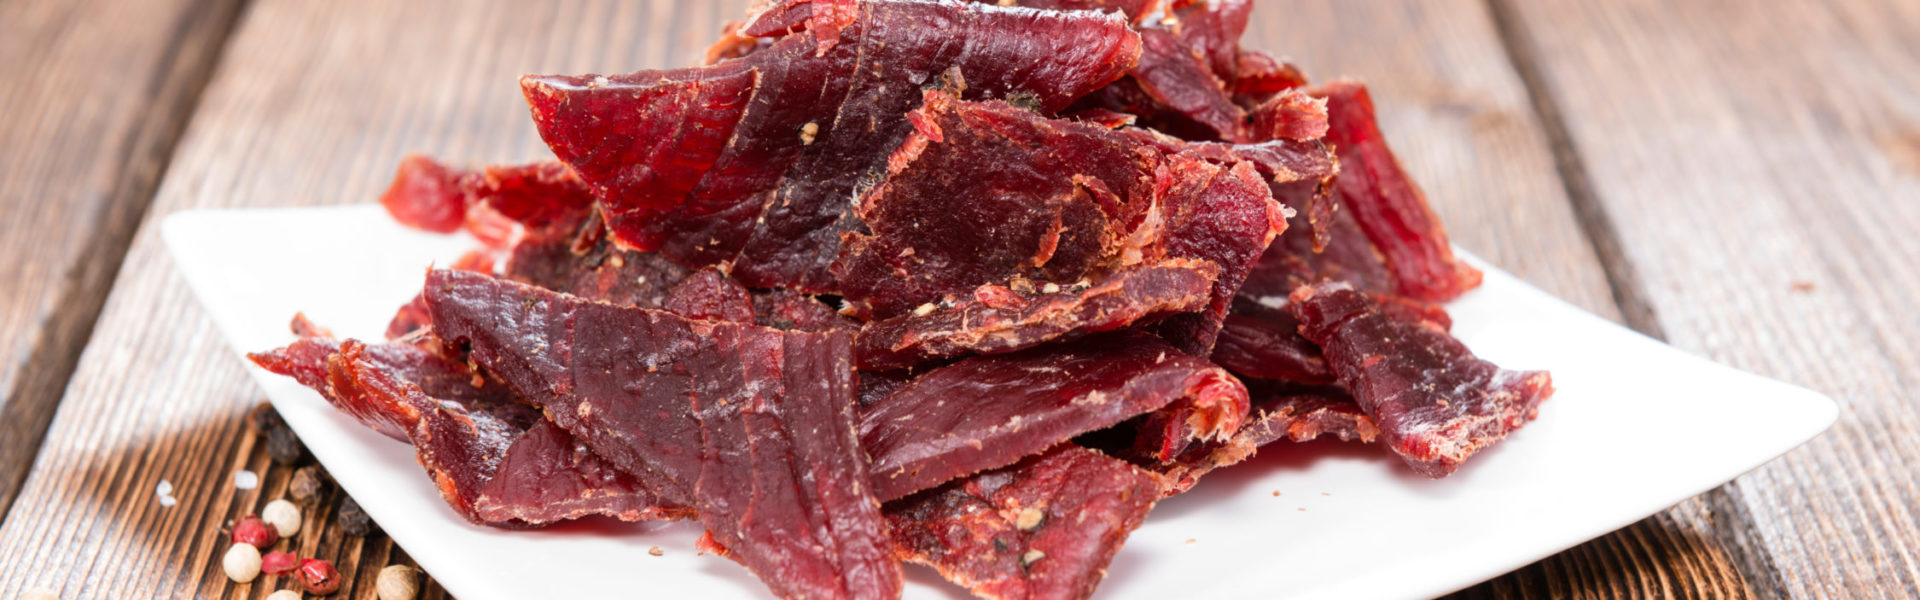 A Healthy Snack Is Beef Jerky Actually? – Resident Weekly